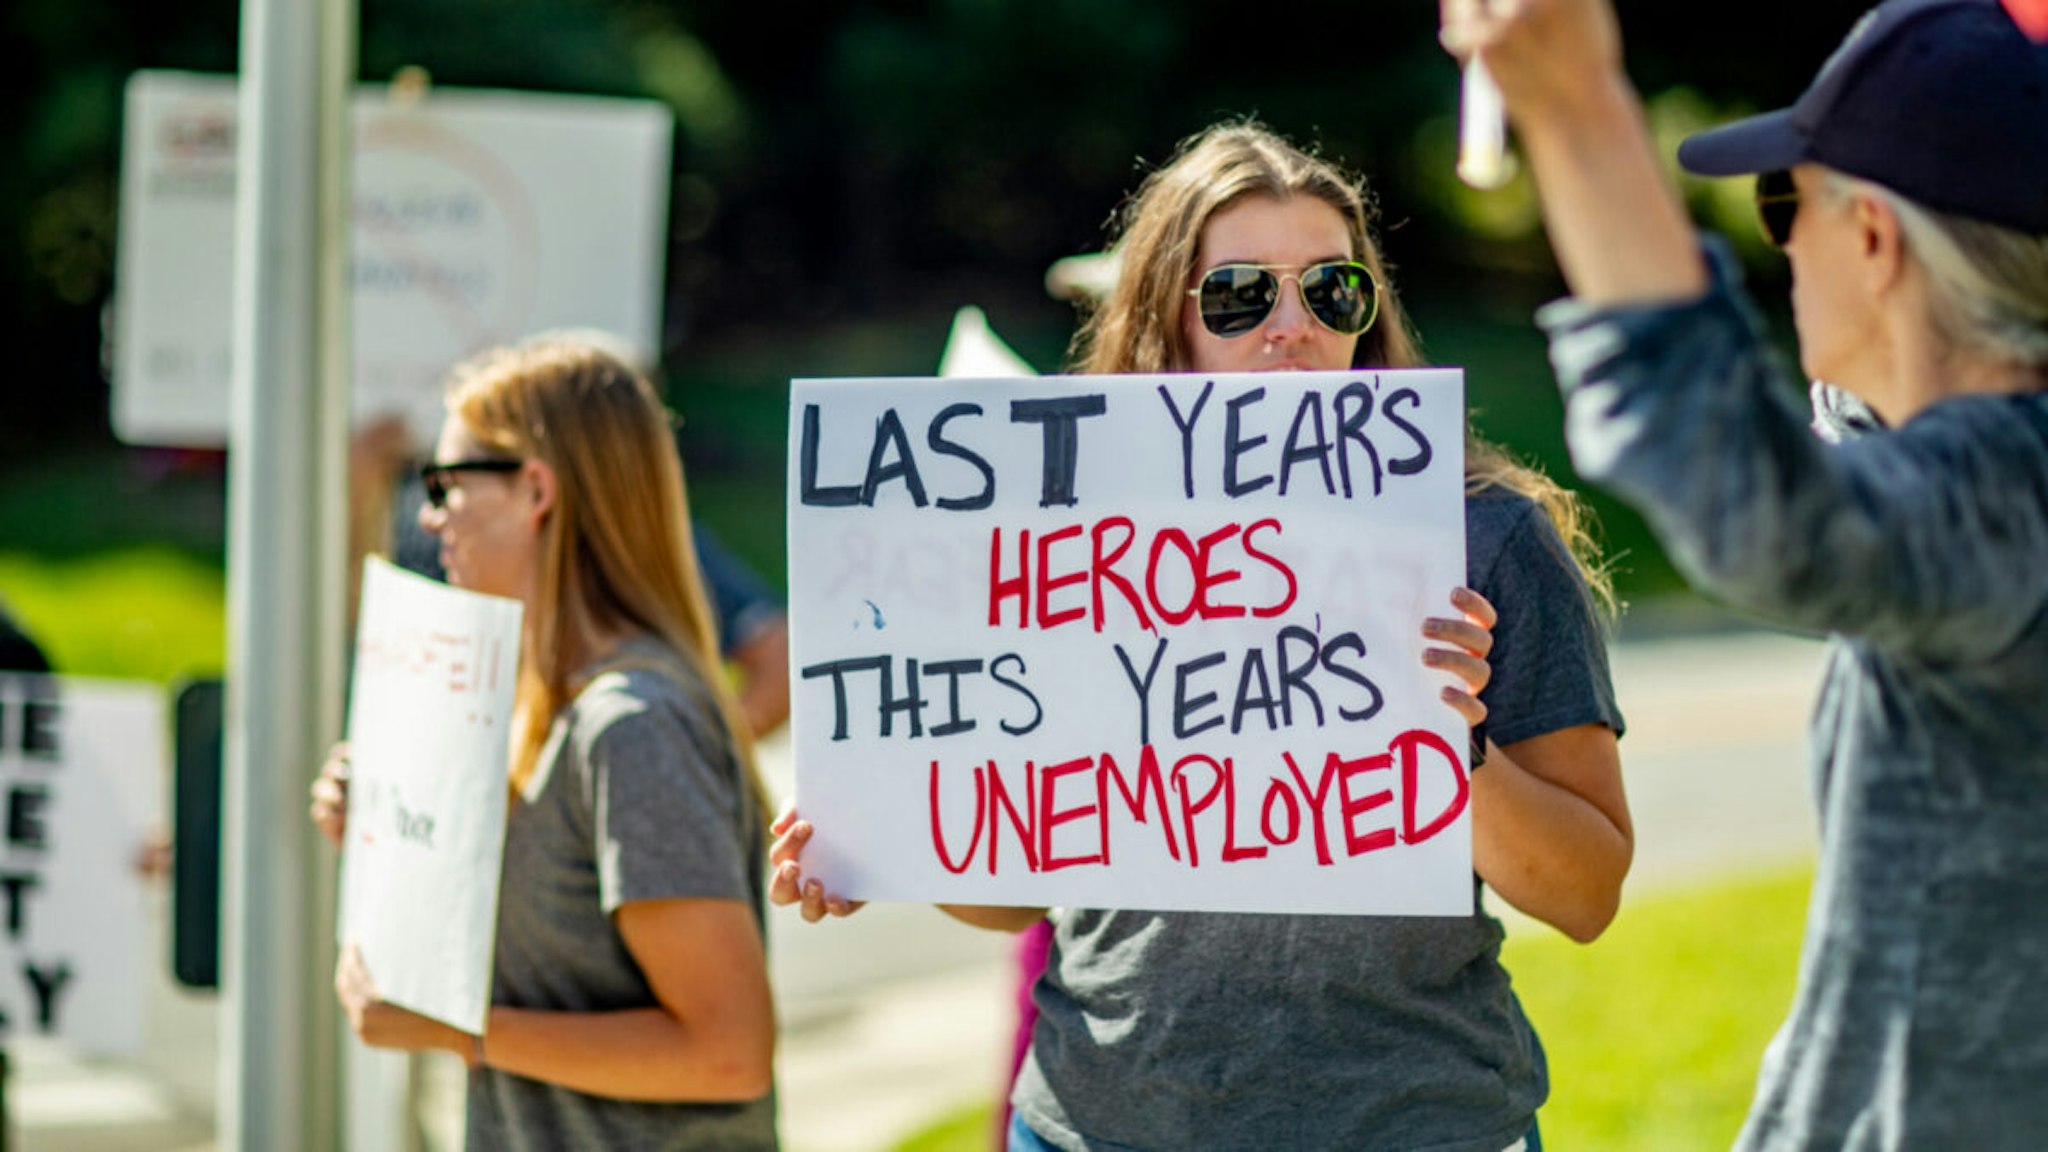 A sign held by a healthcare worker reads "Last Year's Heroes, This Year's Unemployed" at a protest at St. Catherine of Siena Hospital in Smithtown, New York, on Sept. 27, 2021.